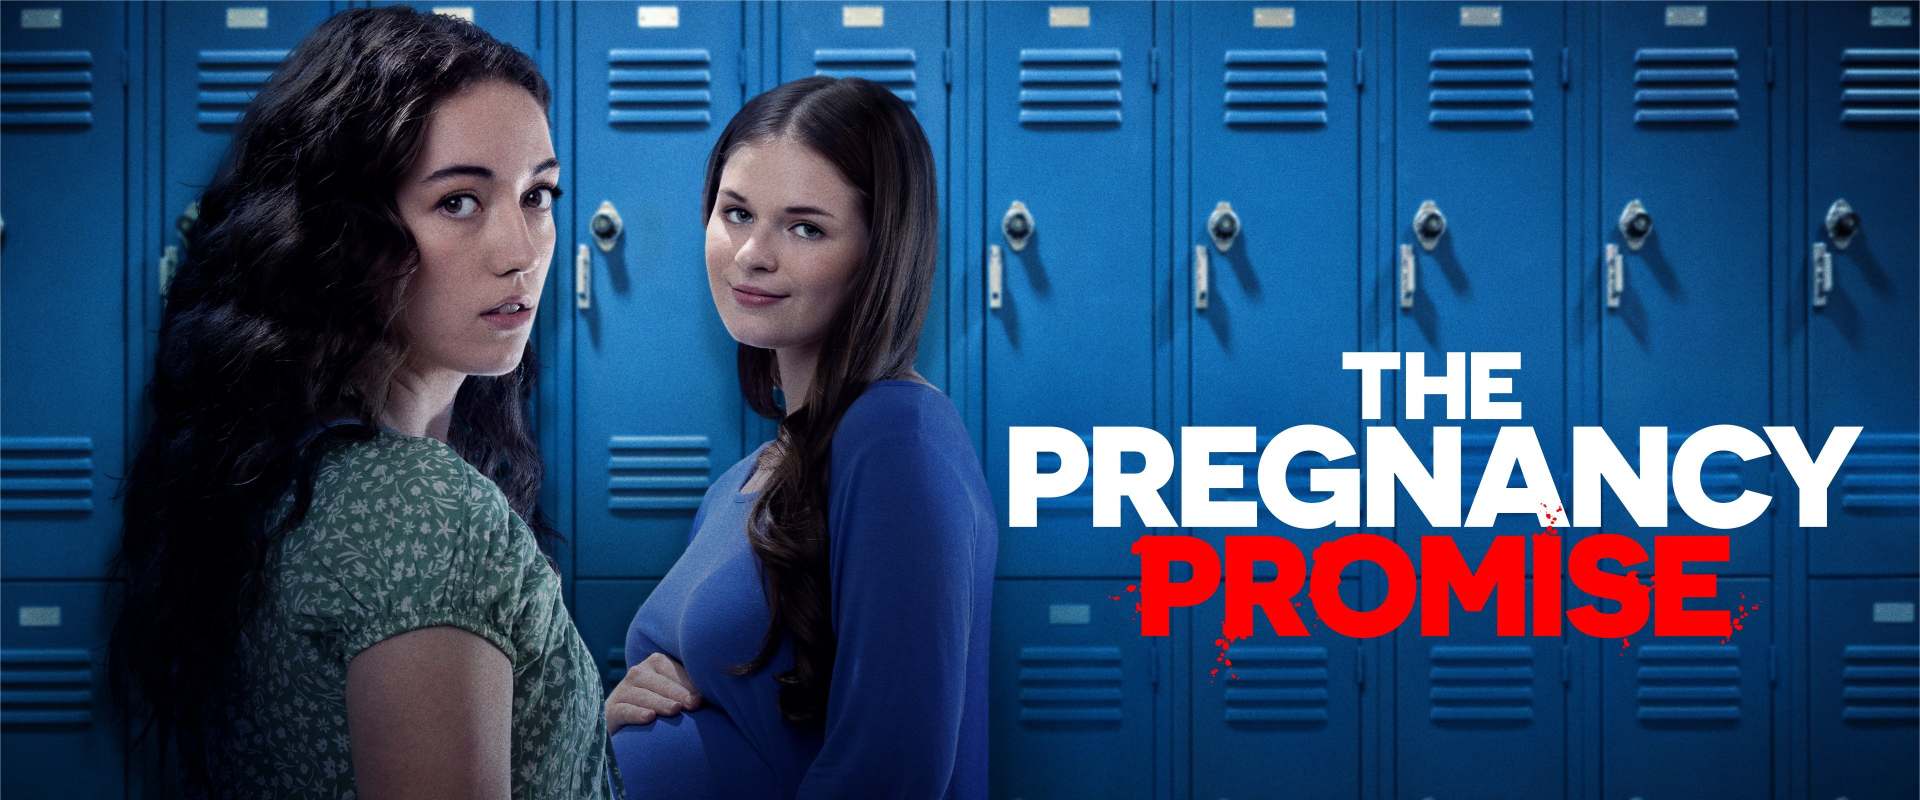 The Pregnancy Promise background 2